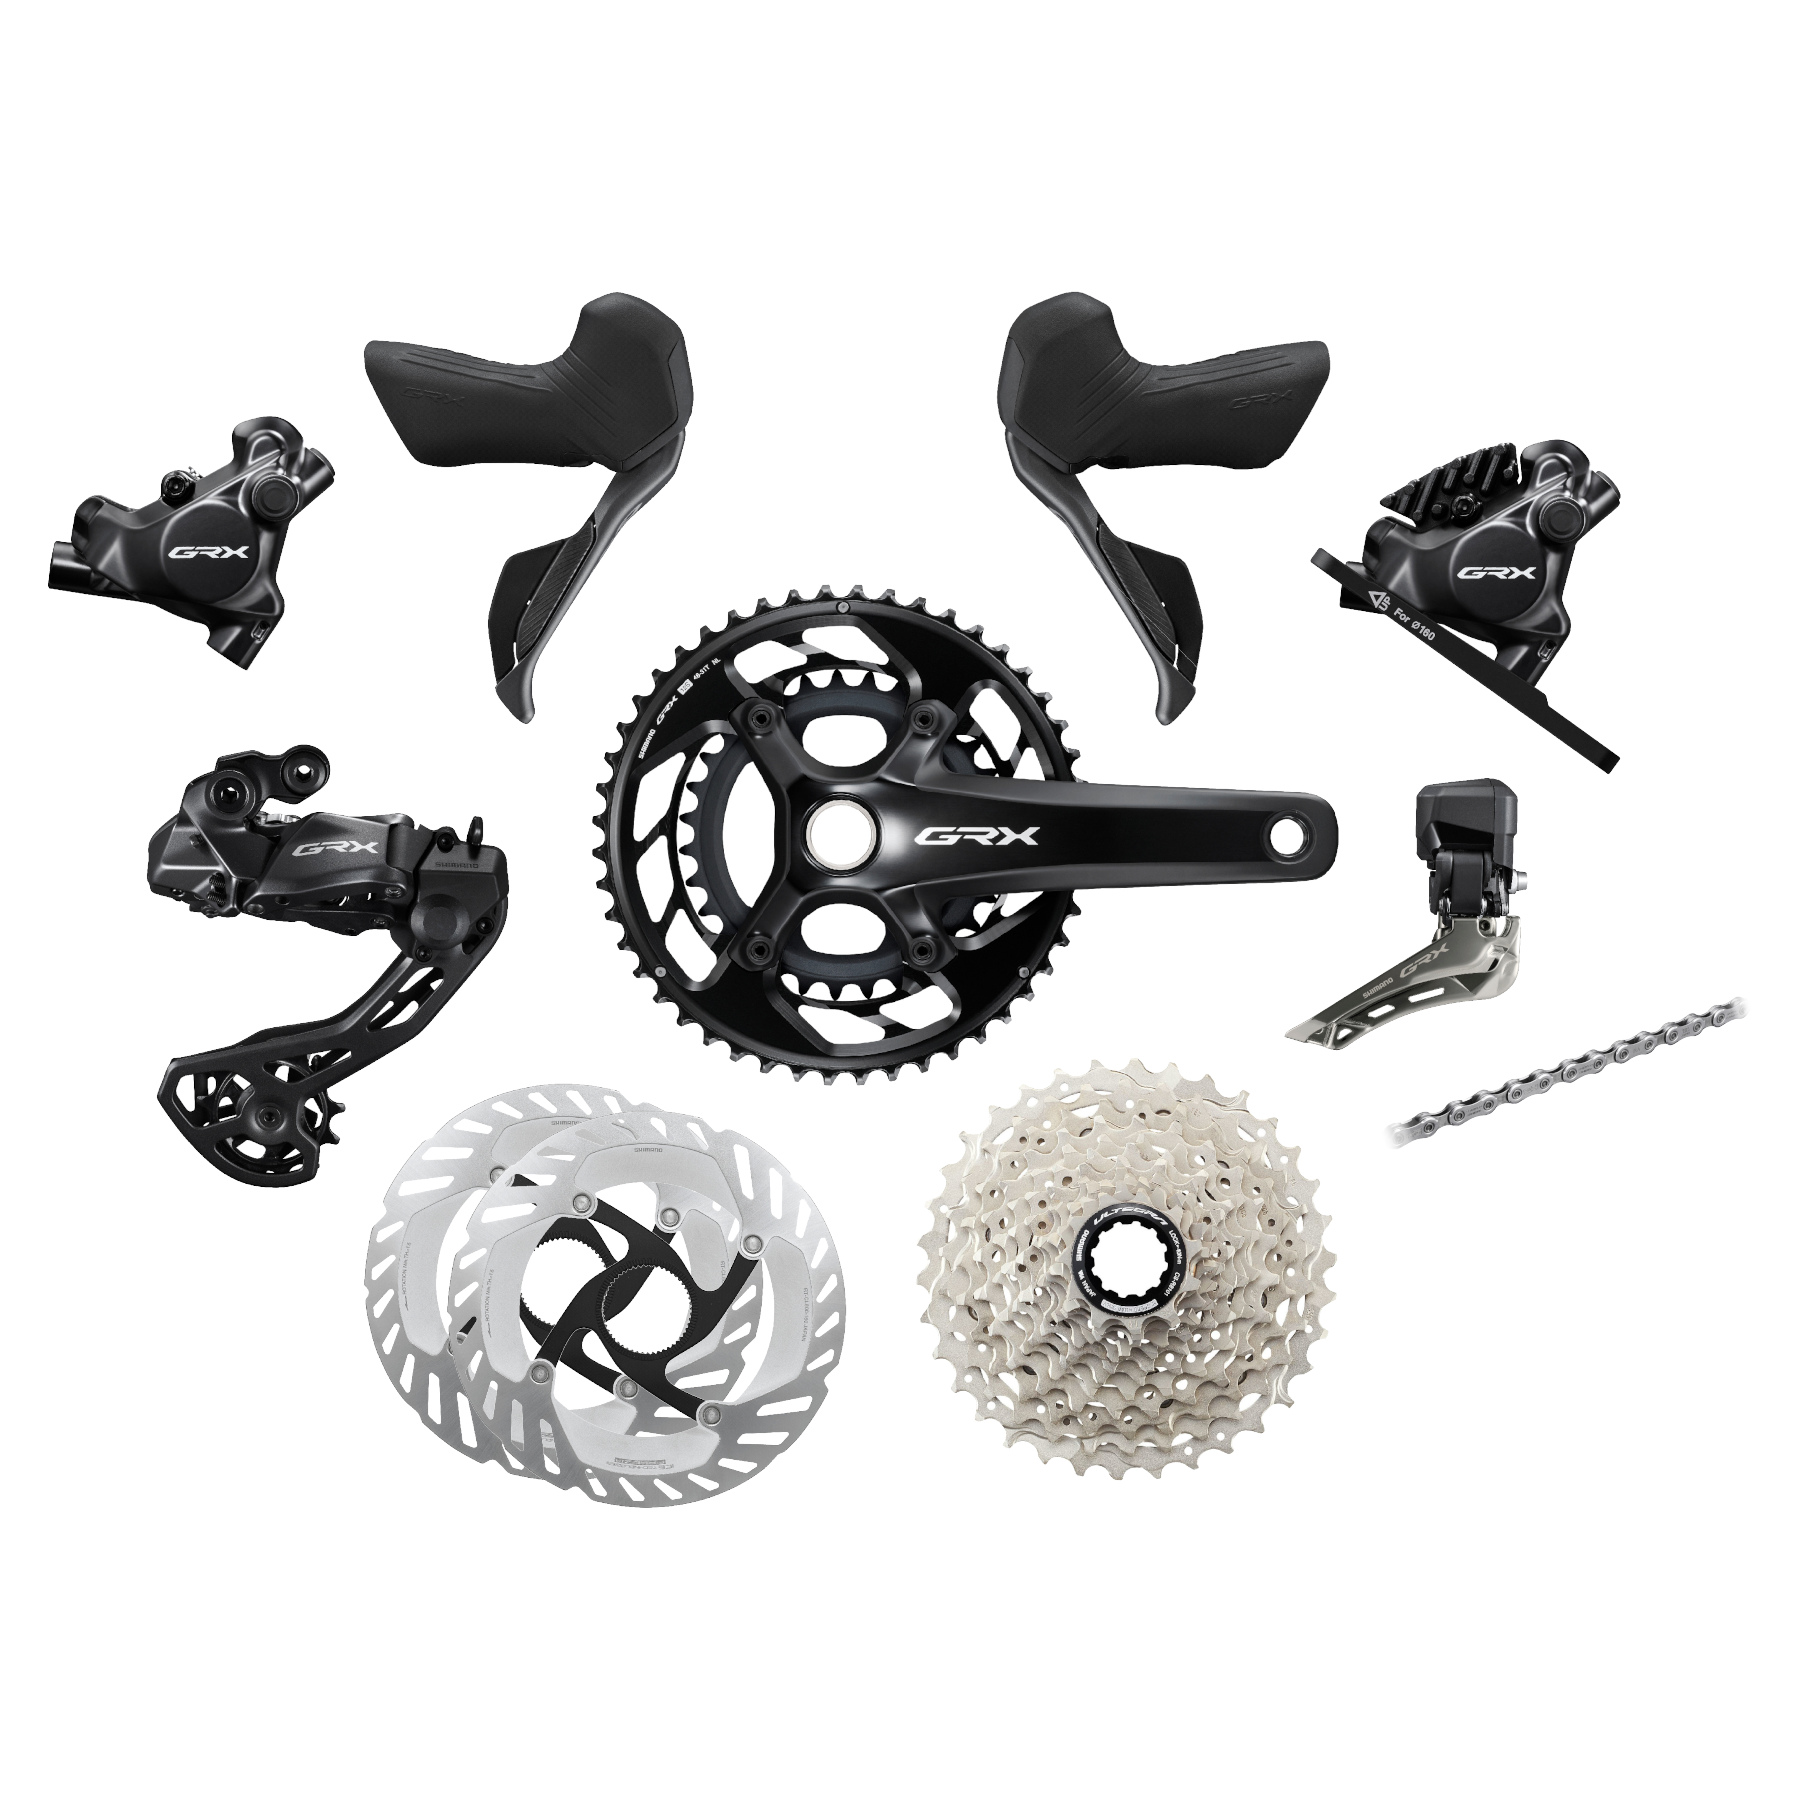 Picture of Shimano GRX RX825 Groupset - Di2 | 2x12-speed | with CS-R8101 Cassette (11-34T)